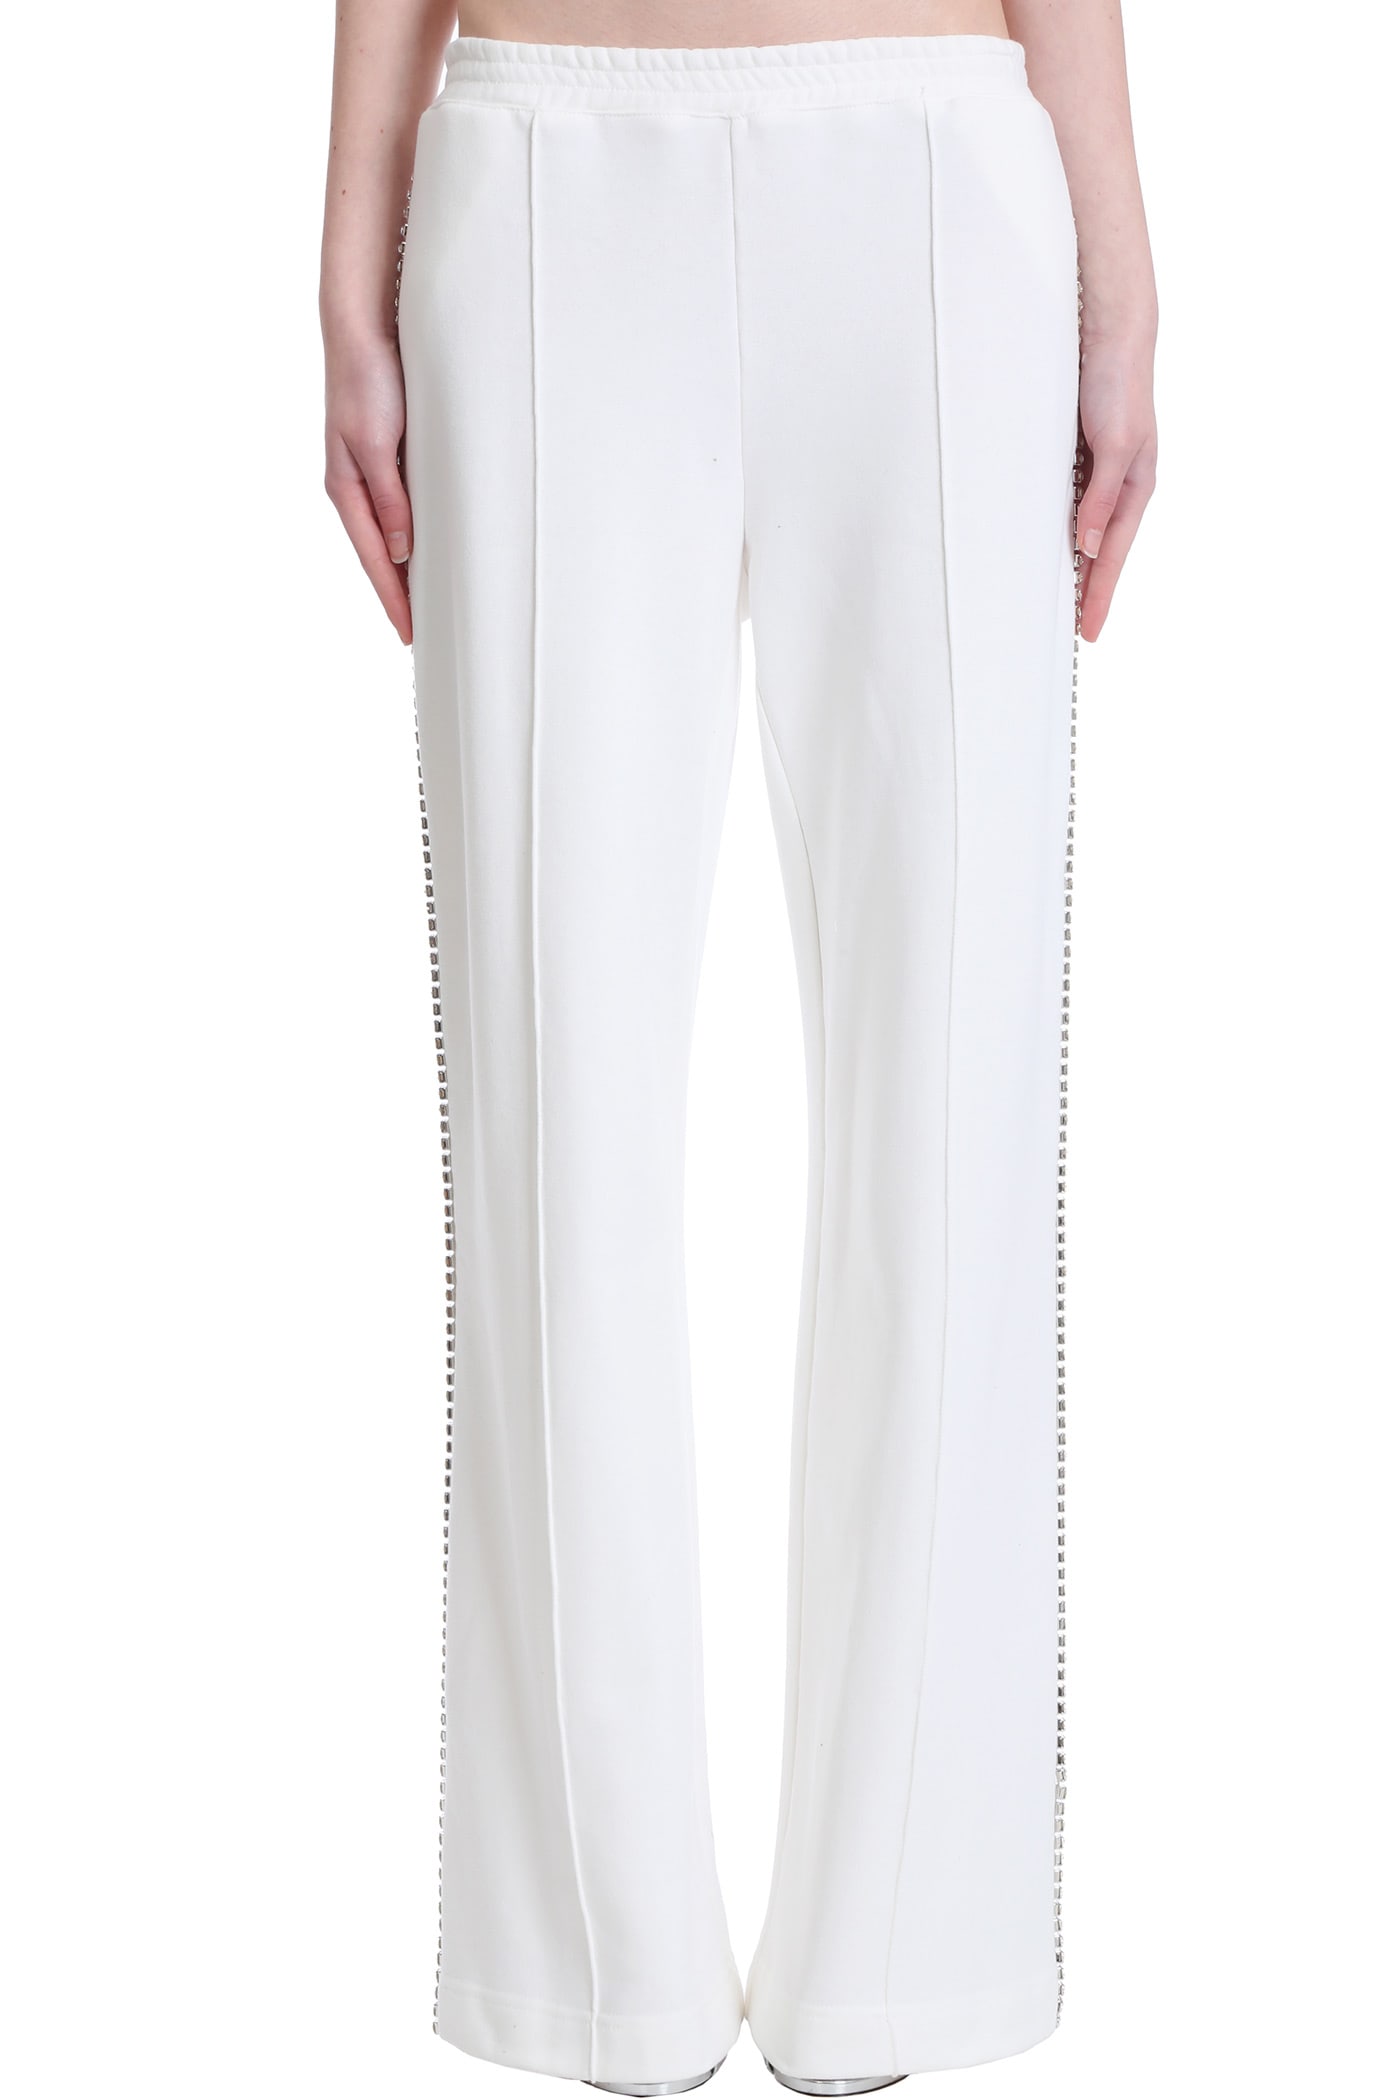 AREA Pants In White Cotton